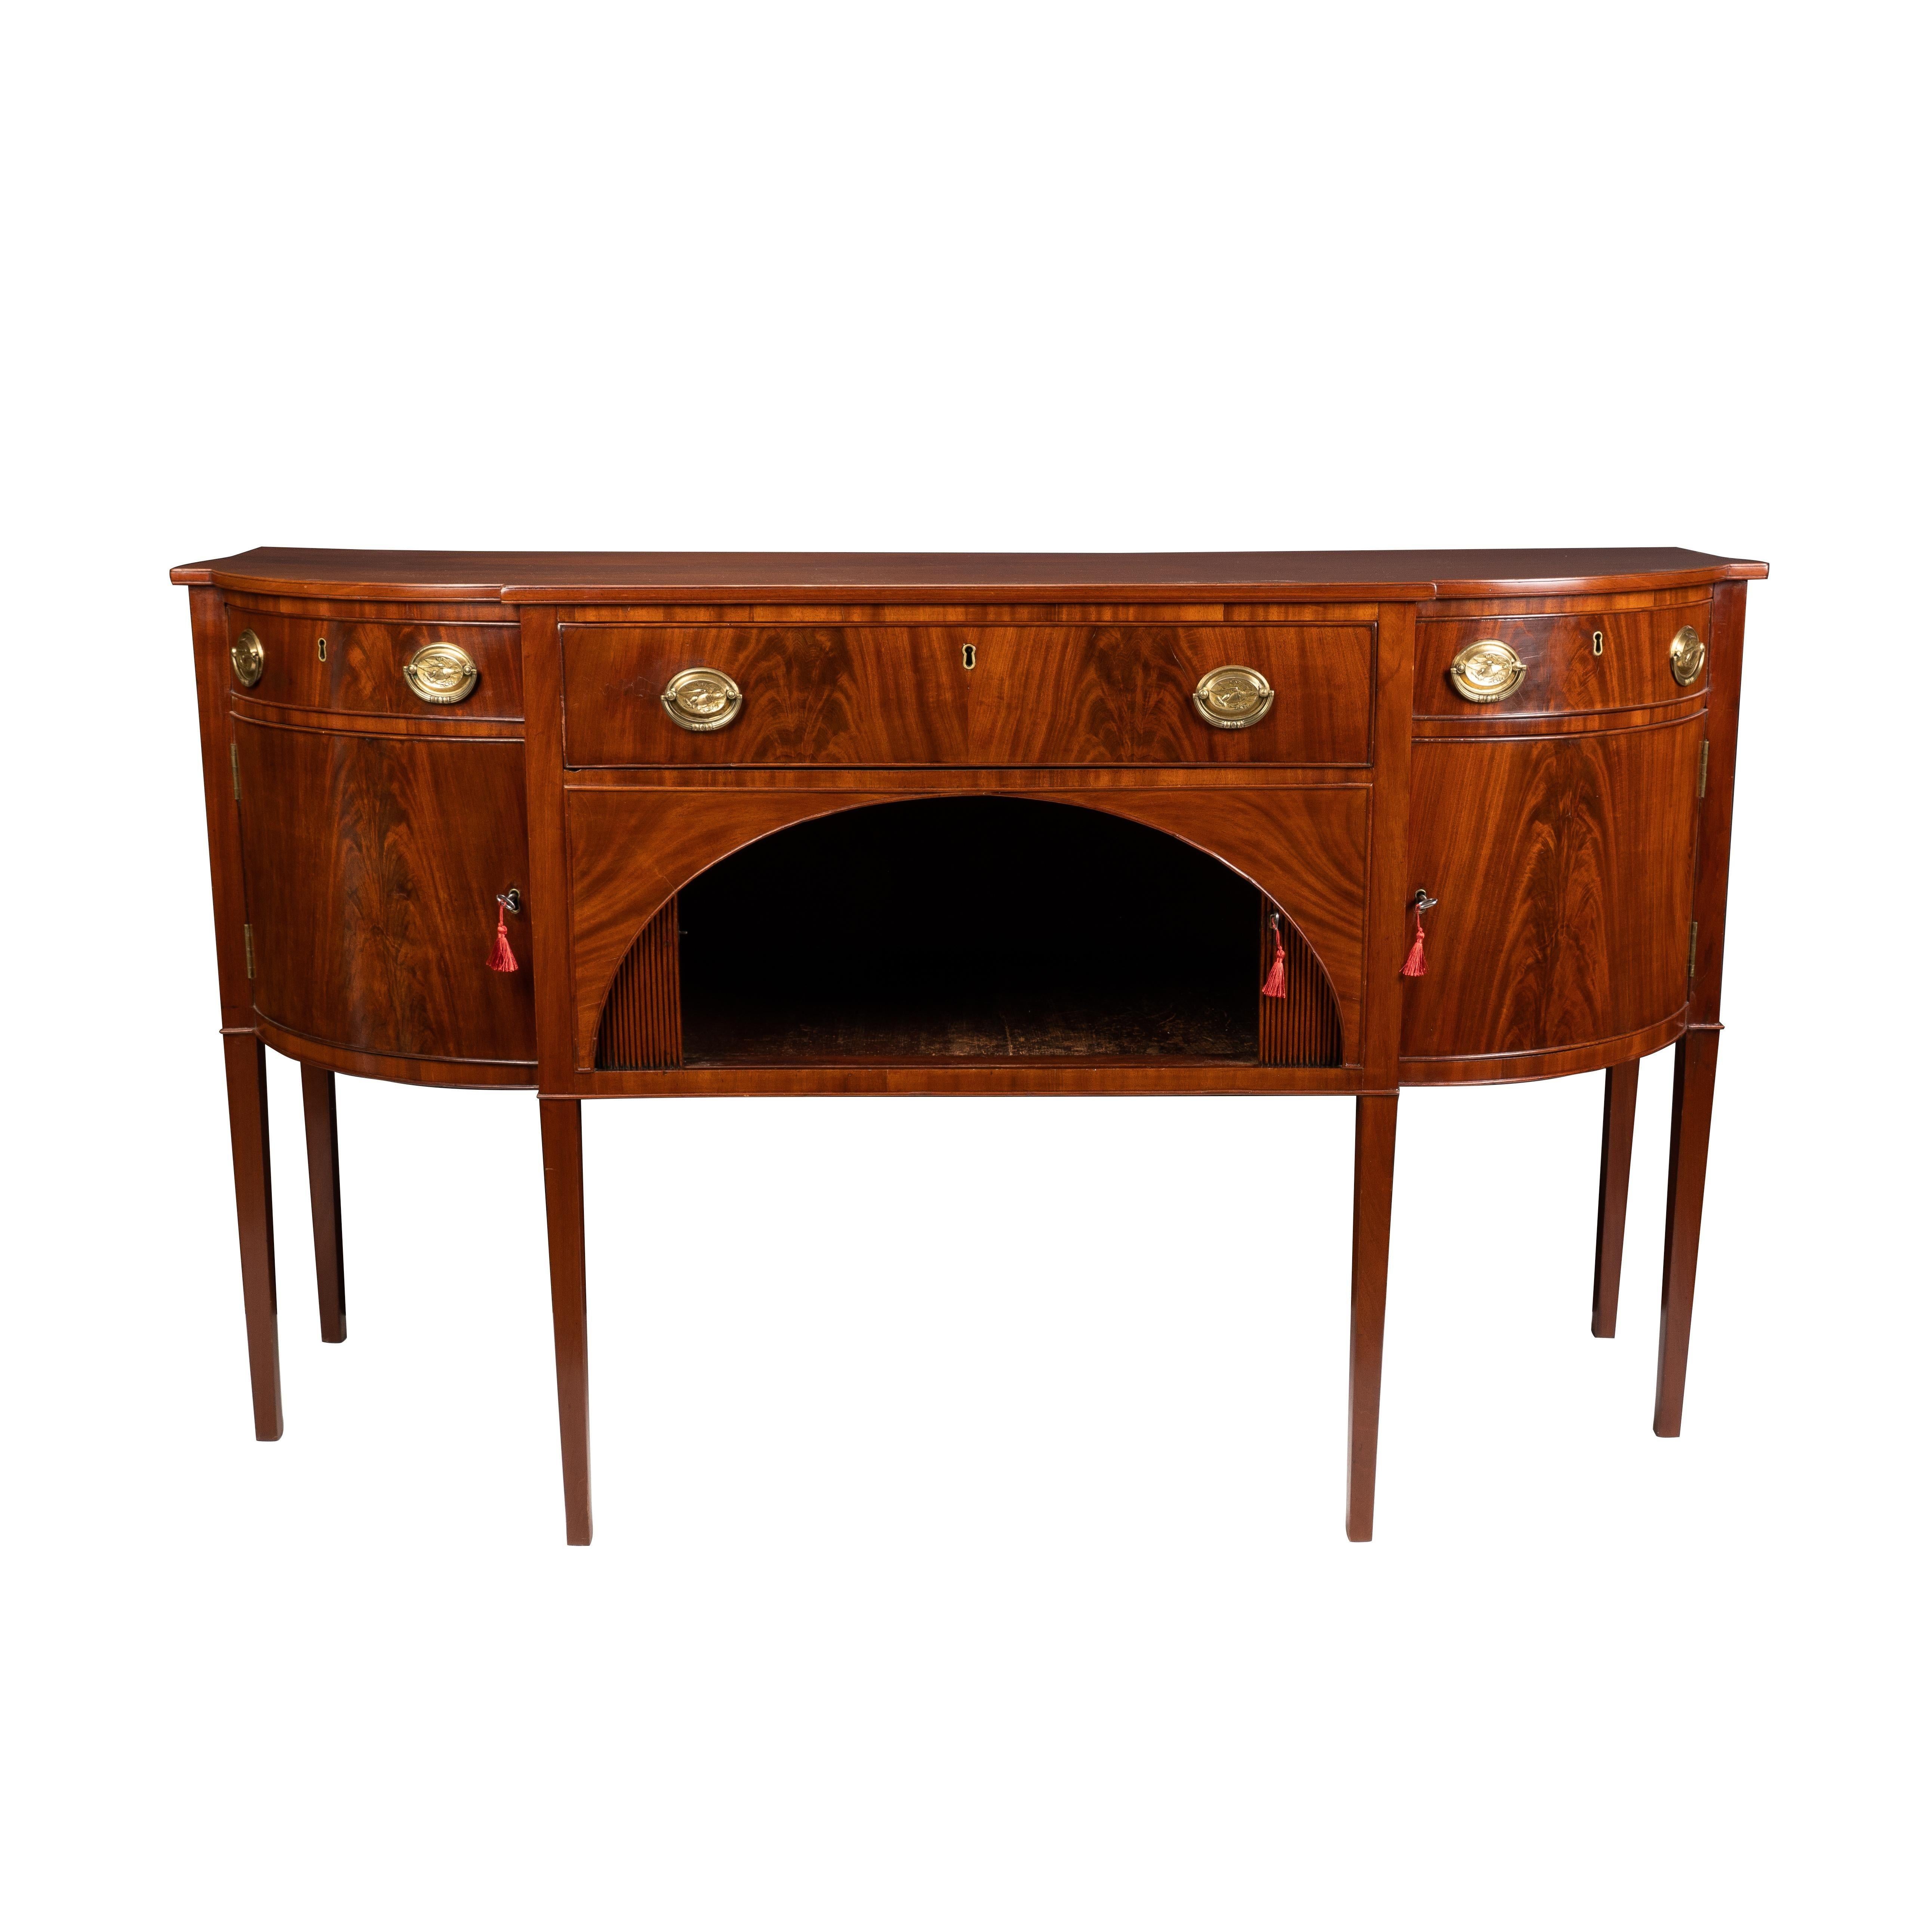 Early 19th Century American Hepplewhite Mahogany Sideboard, 1800-10 For Sale